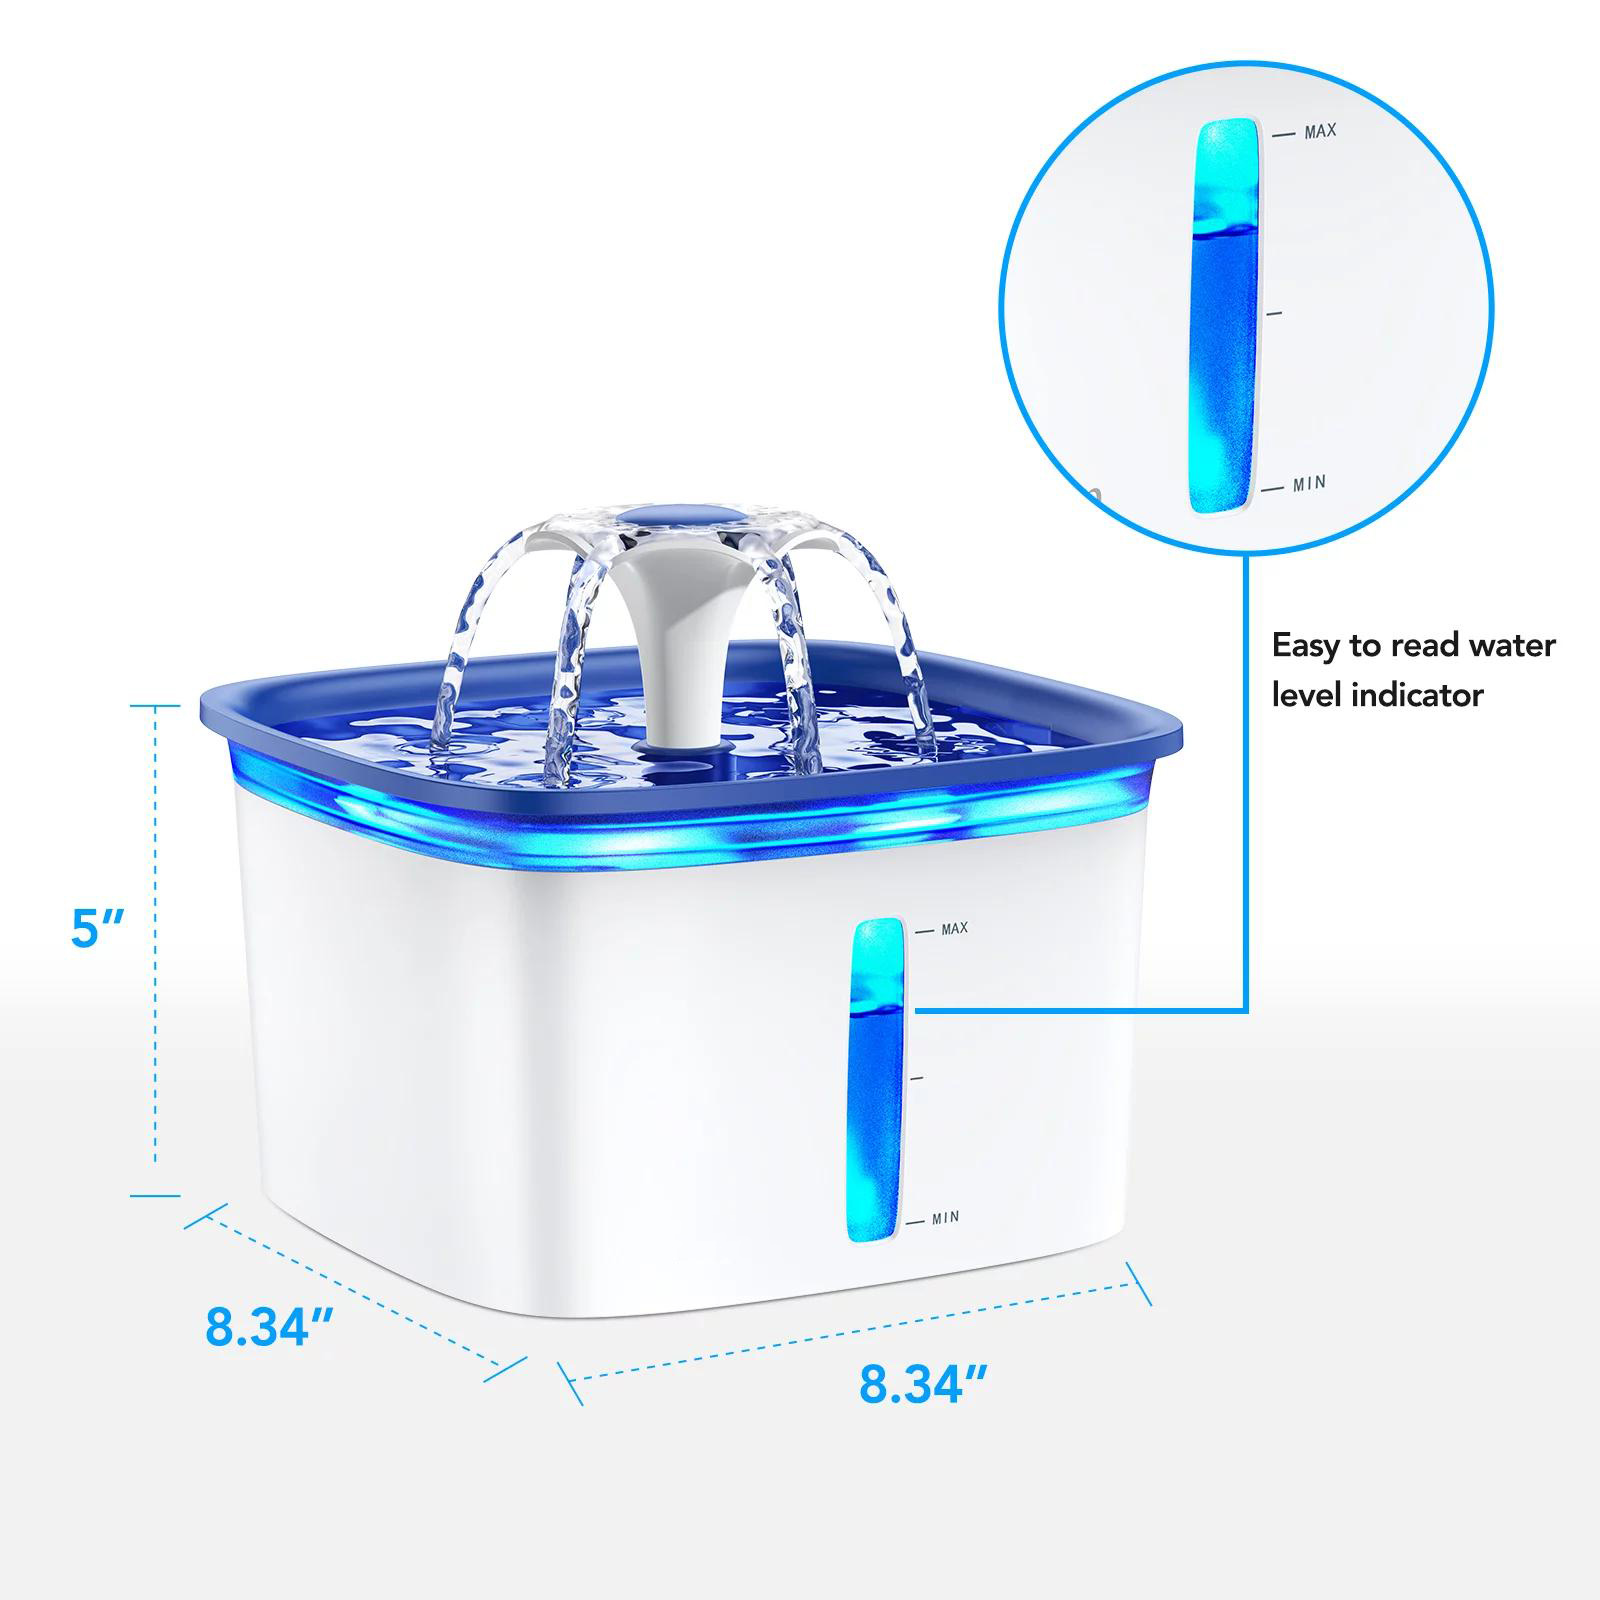 Automatic Pet Water Fountain 95oz/2.8L with Replacement Filters, Electric Water Bowl for Cats, Dogs, Multiple Pets, Cat & Dog Water Dispenser with Efficient Pump, Blue, Plastic - image 3 of 11